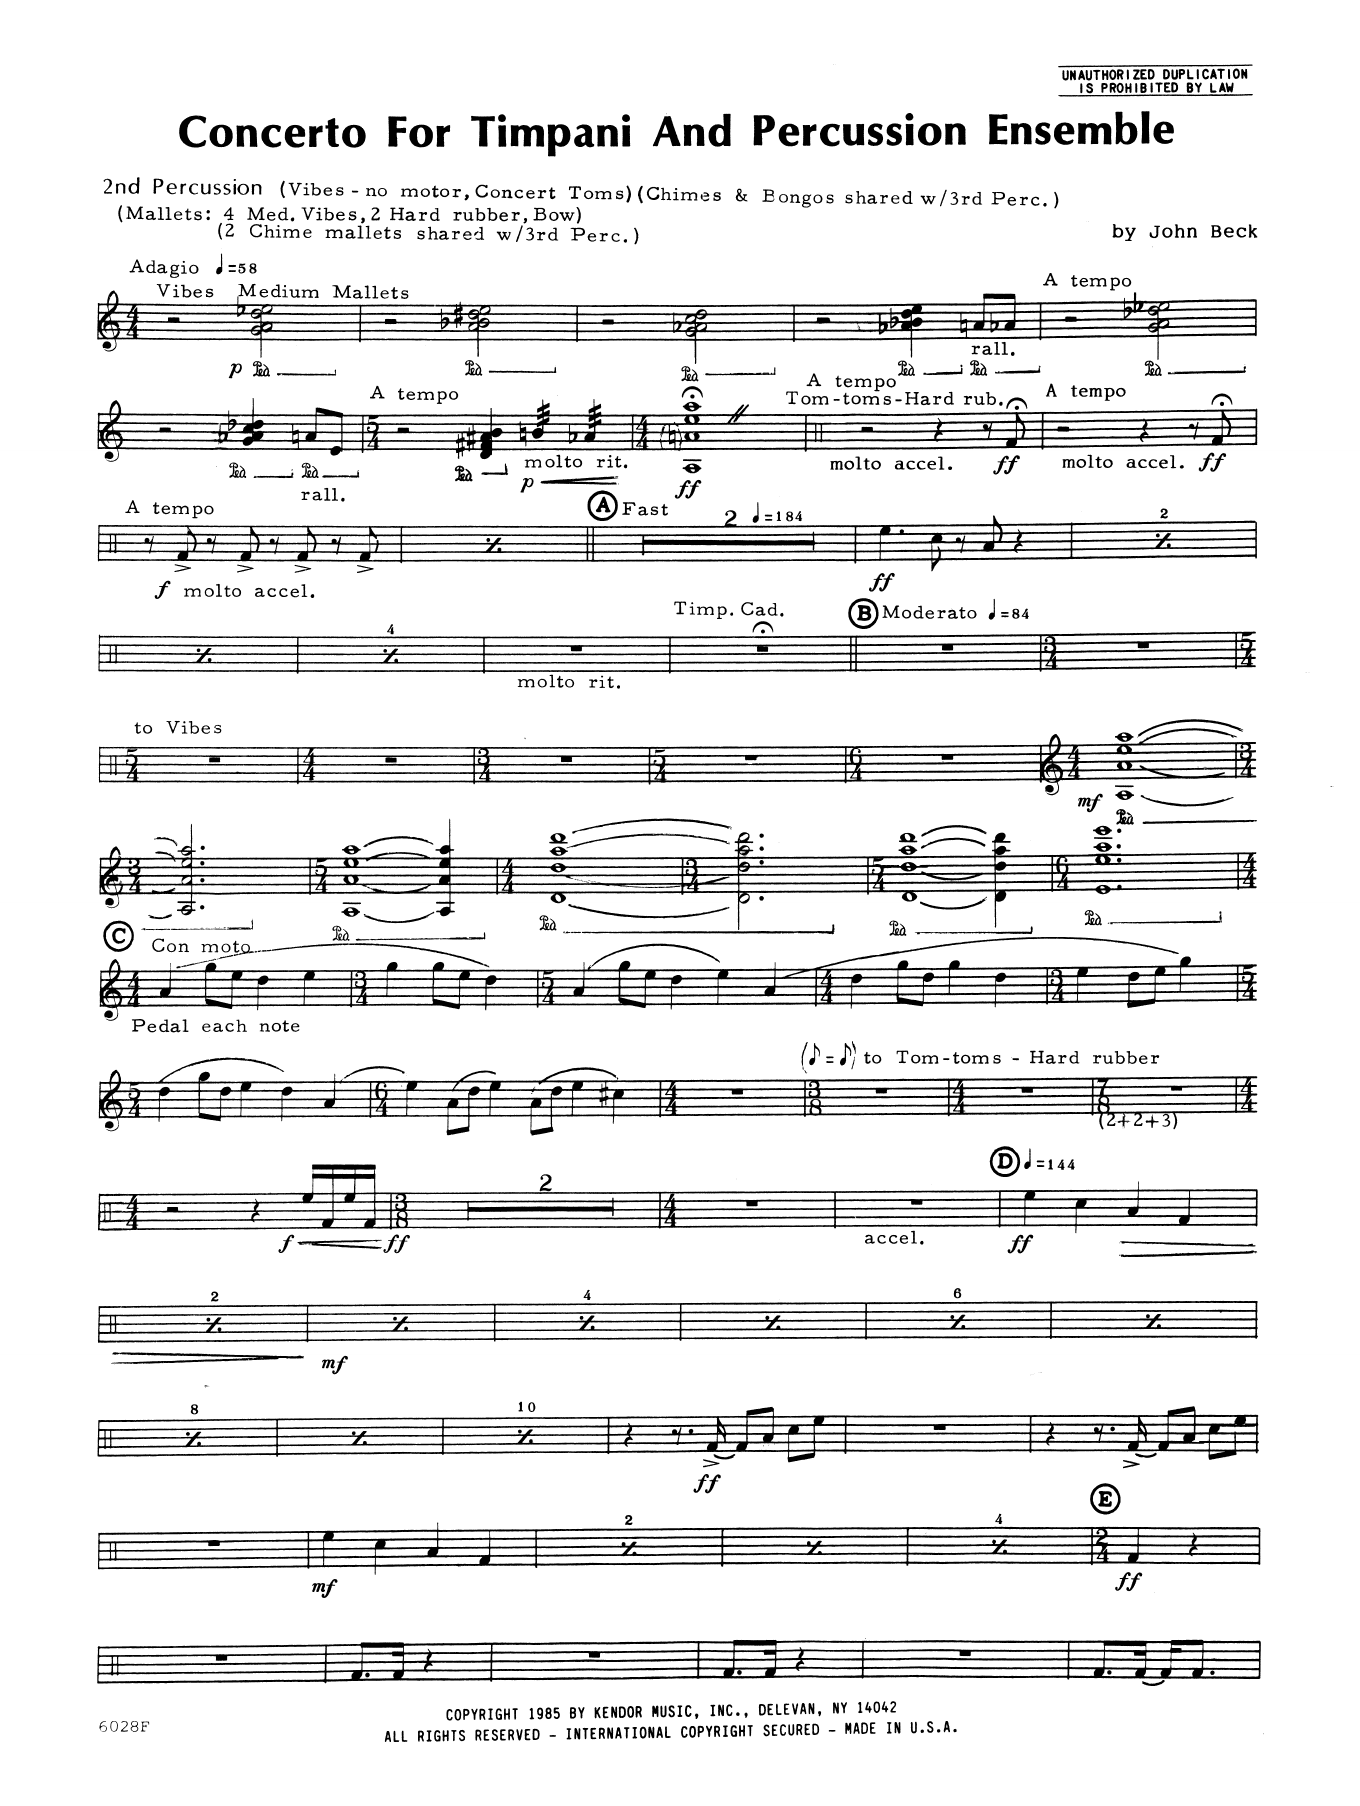 Download John H. Beck Concerto For Timpani And Percussion Ens Sheet Music